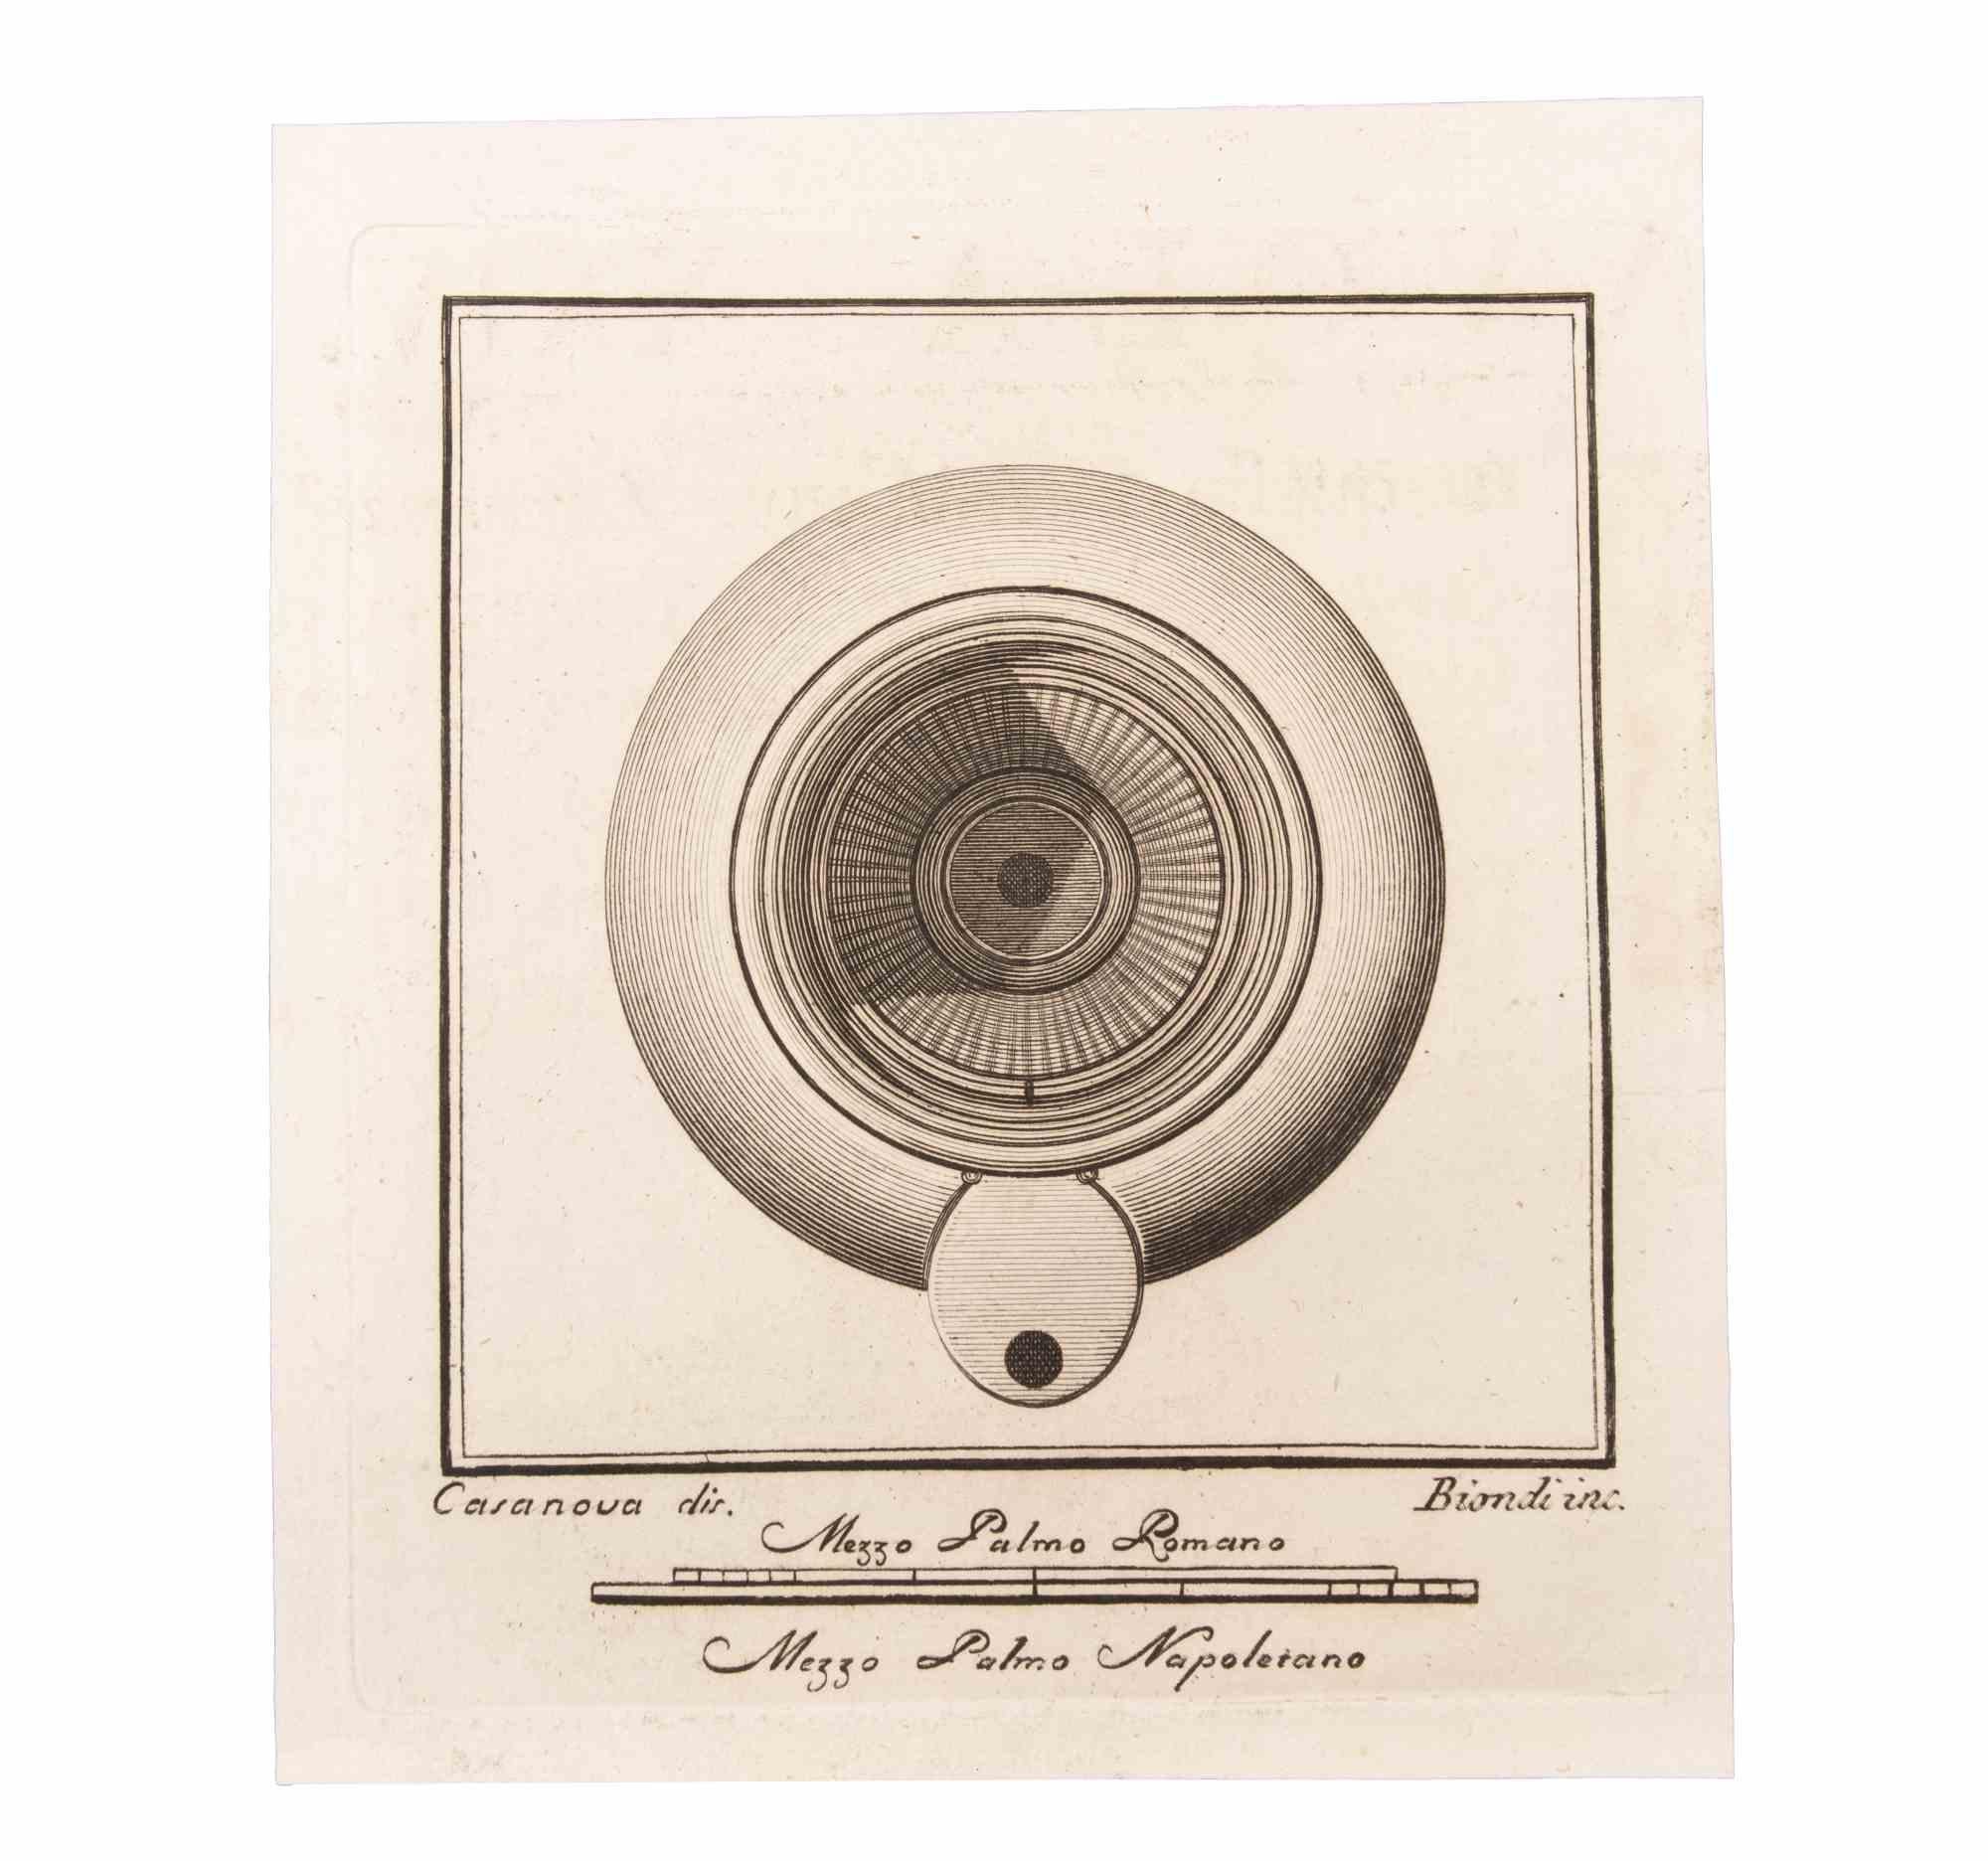 Oil Lamp is an Etching realized by  Luigi Biondi (1776-1839).

The etching belongs to the print suite “Antiquities of Herculaneum Exposed” (original title: “Le Antichità di Ercolano Esposte”), an eight-volume volume of engravings of the finds from